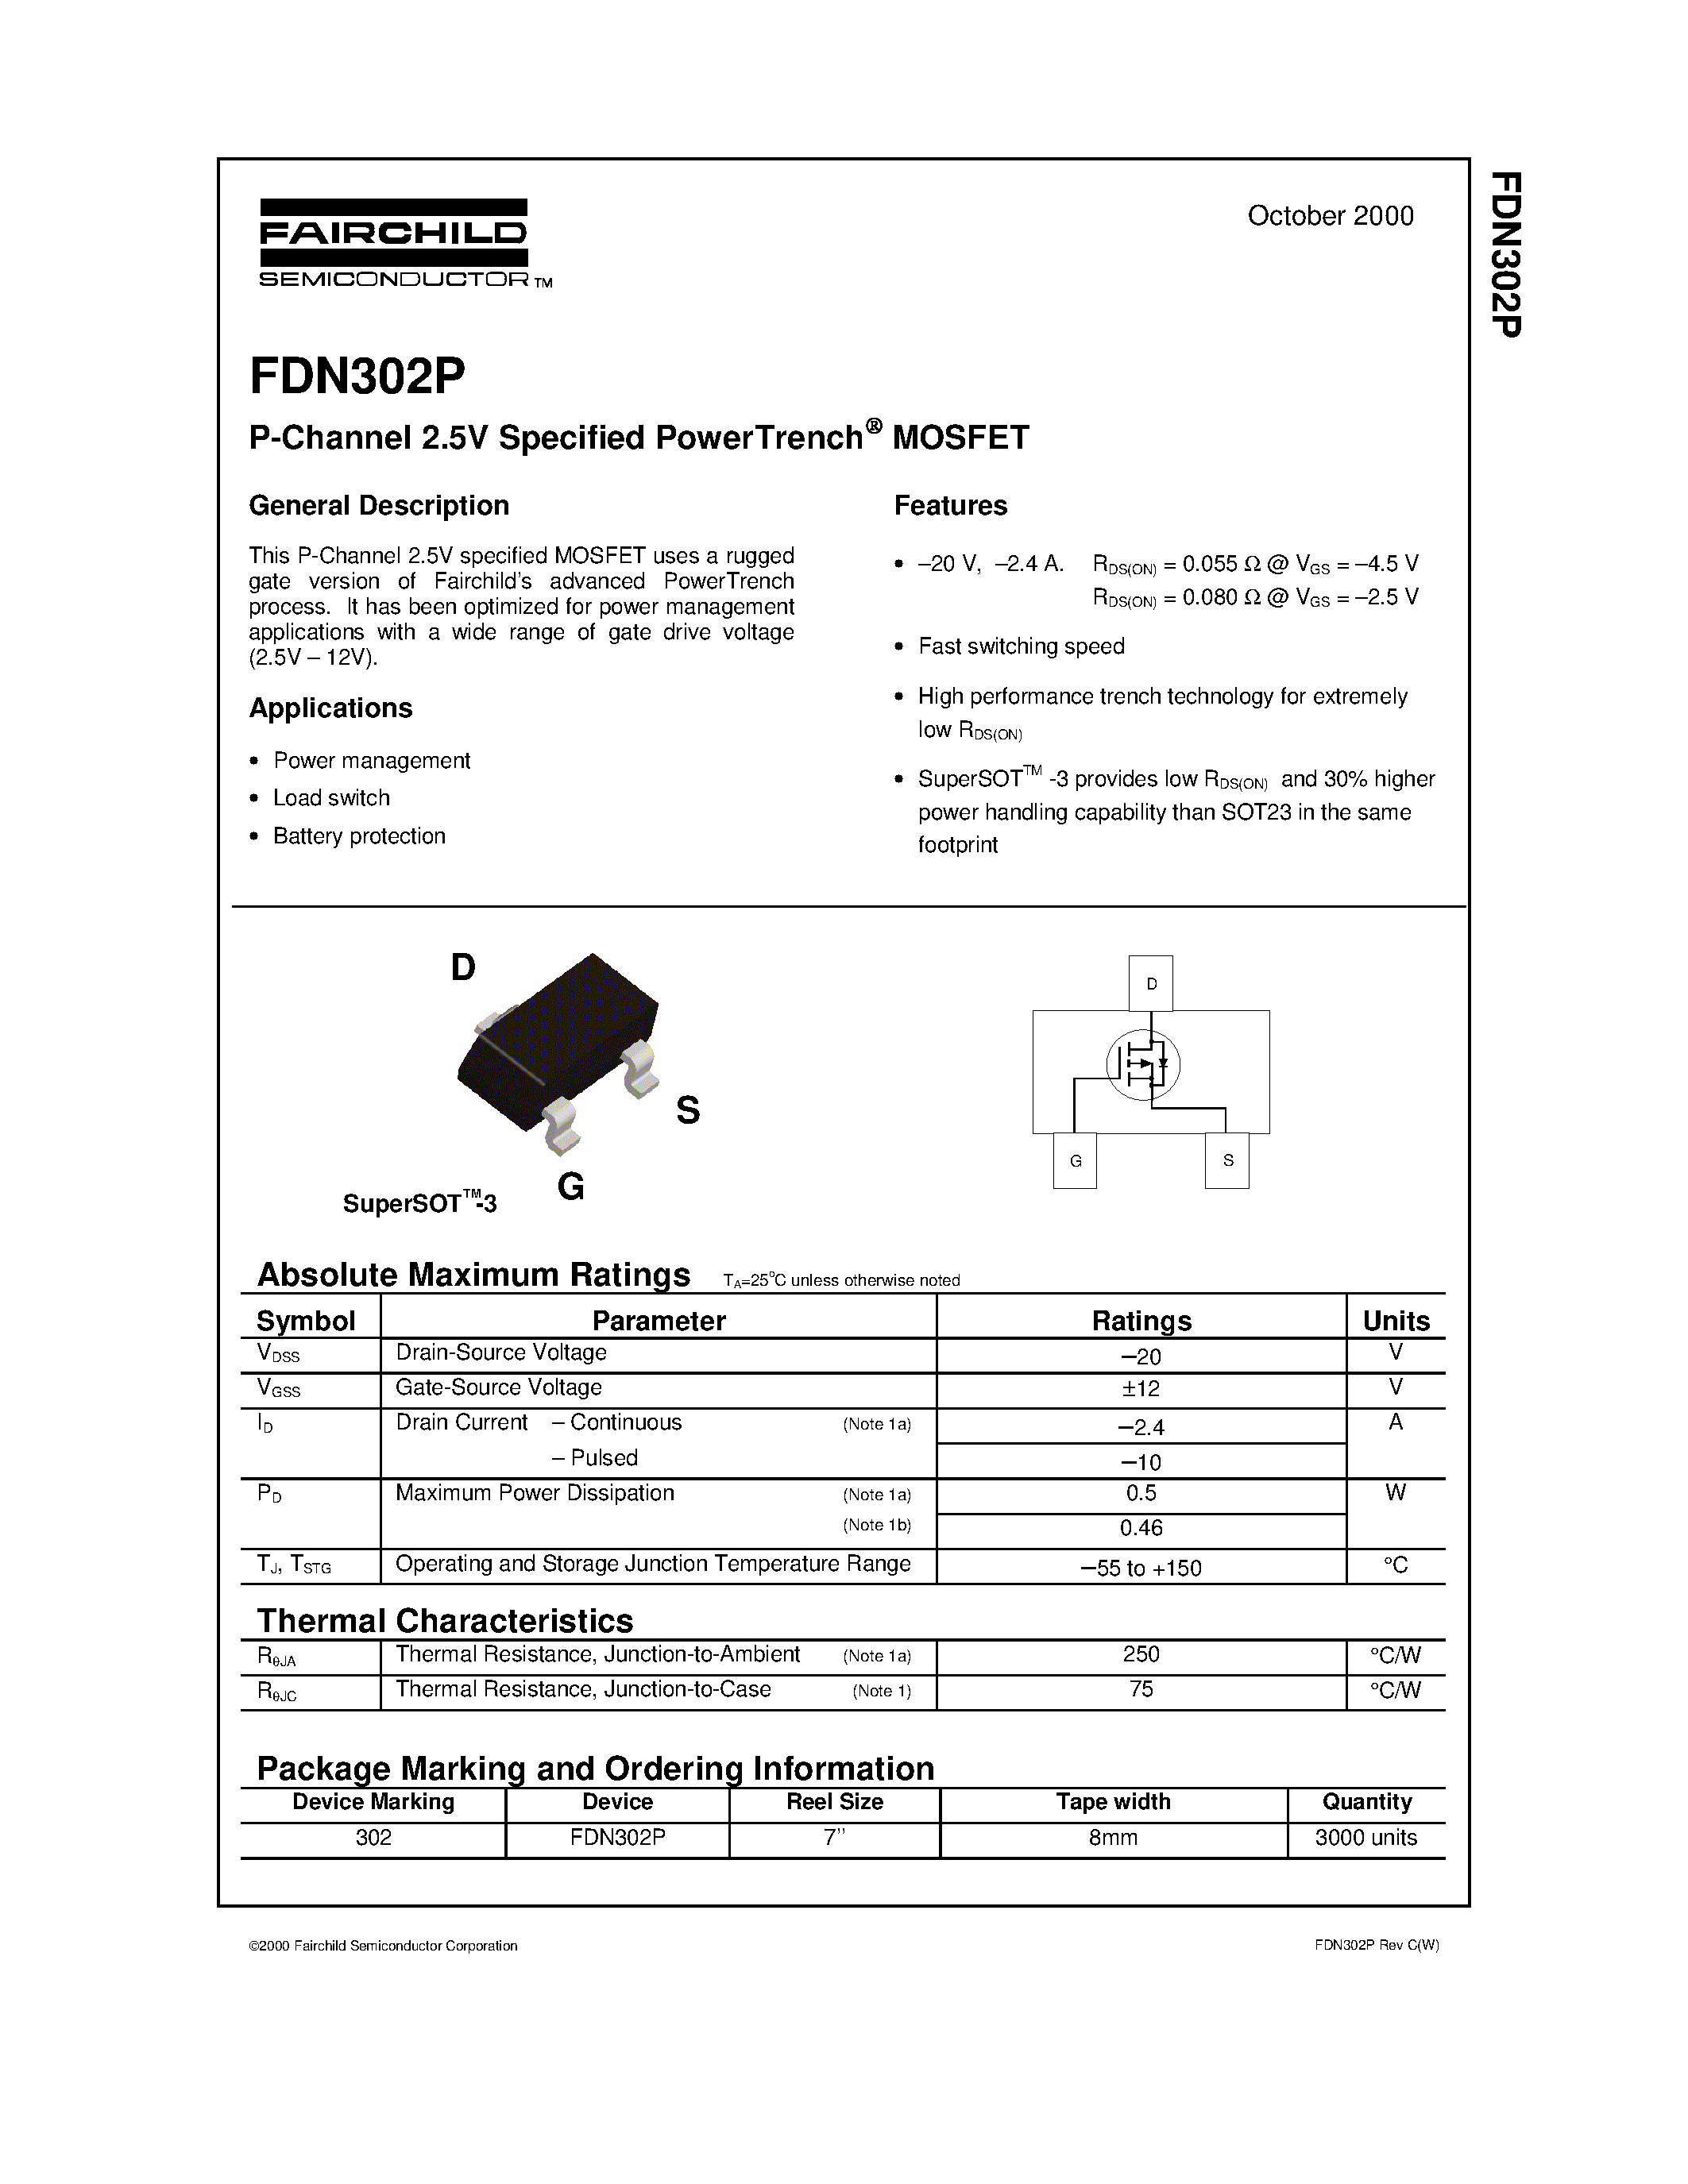 Даташит FDN302-P-Channel 2.5V Specified PowerTrench MOSFET страница 1